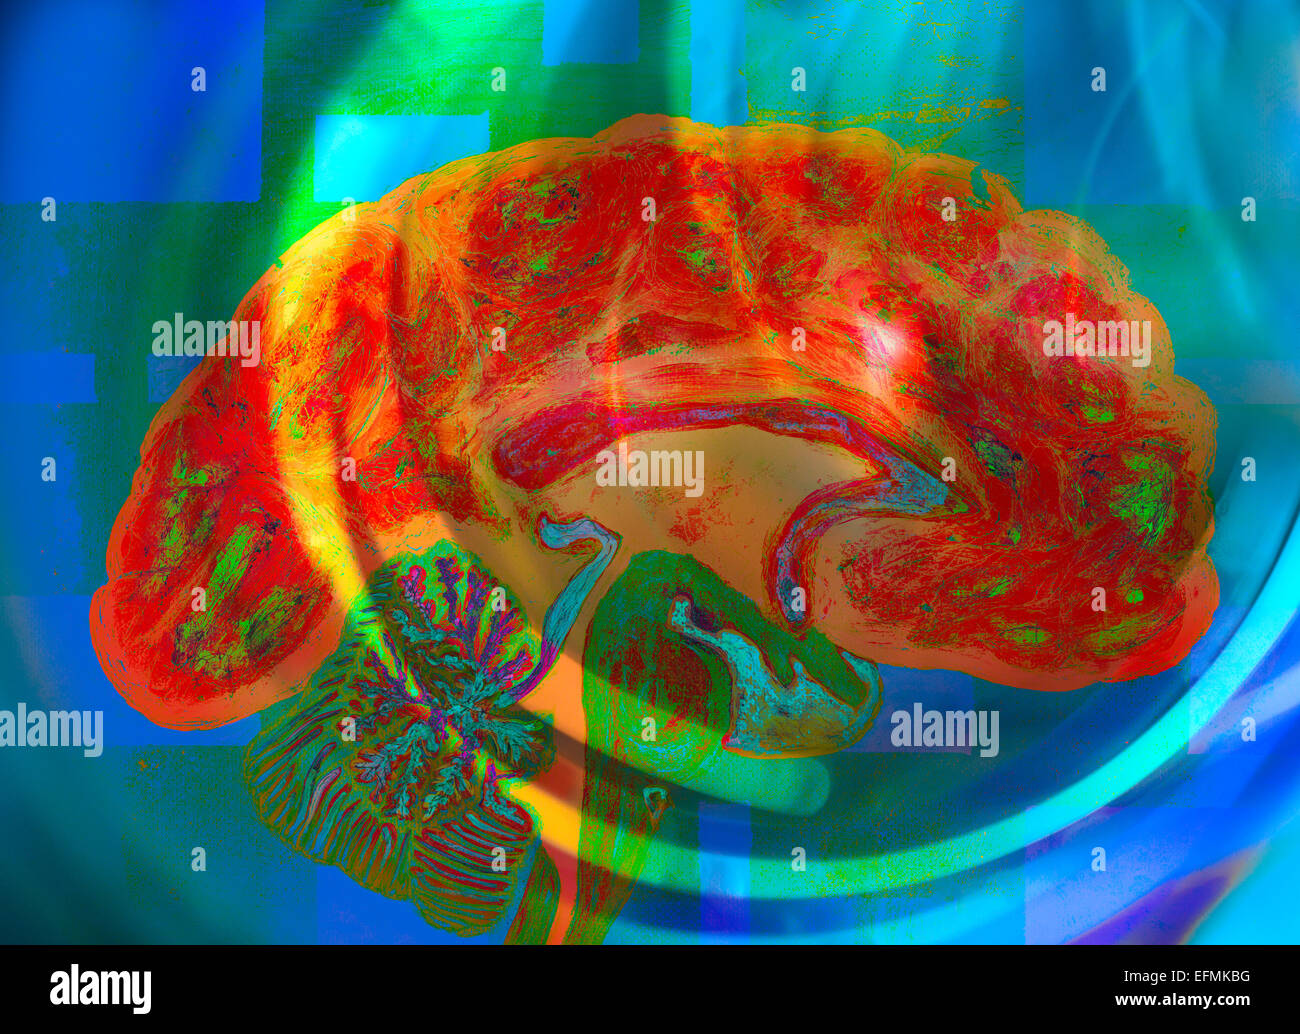 Brain illustration with bright colors Stock Photo